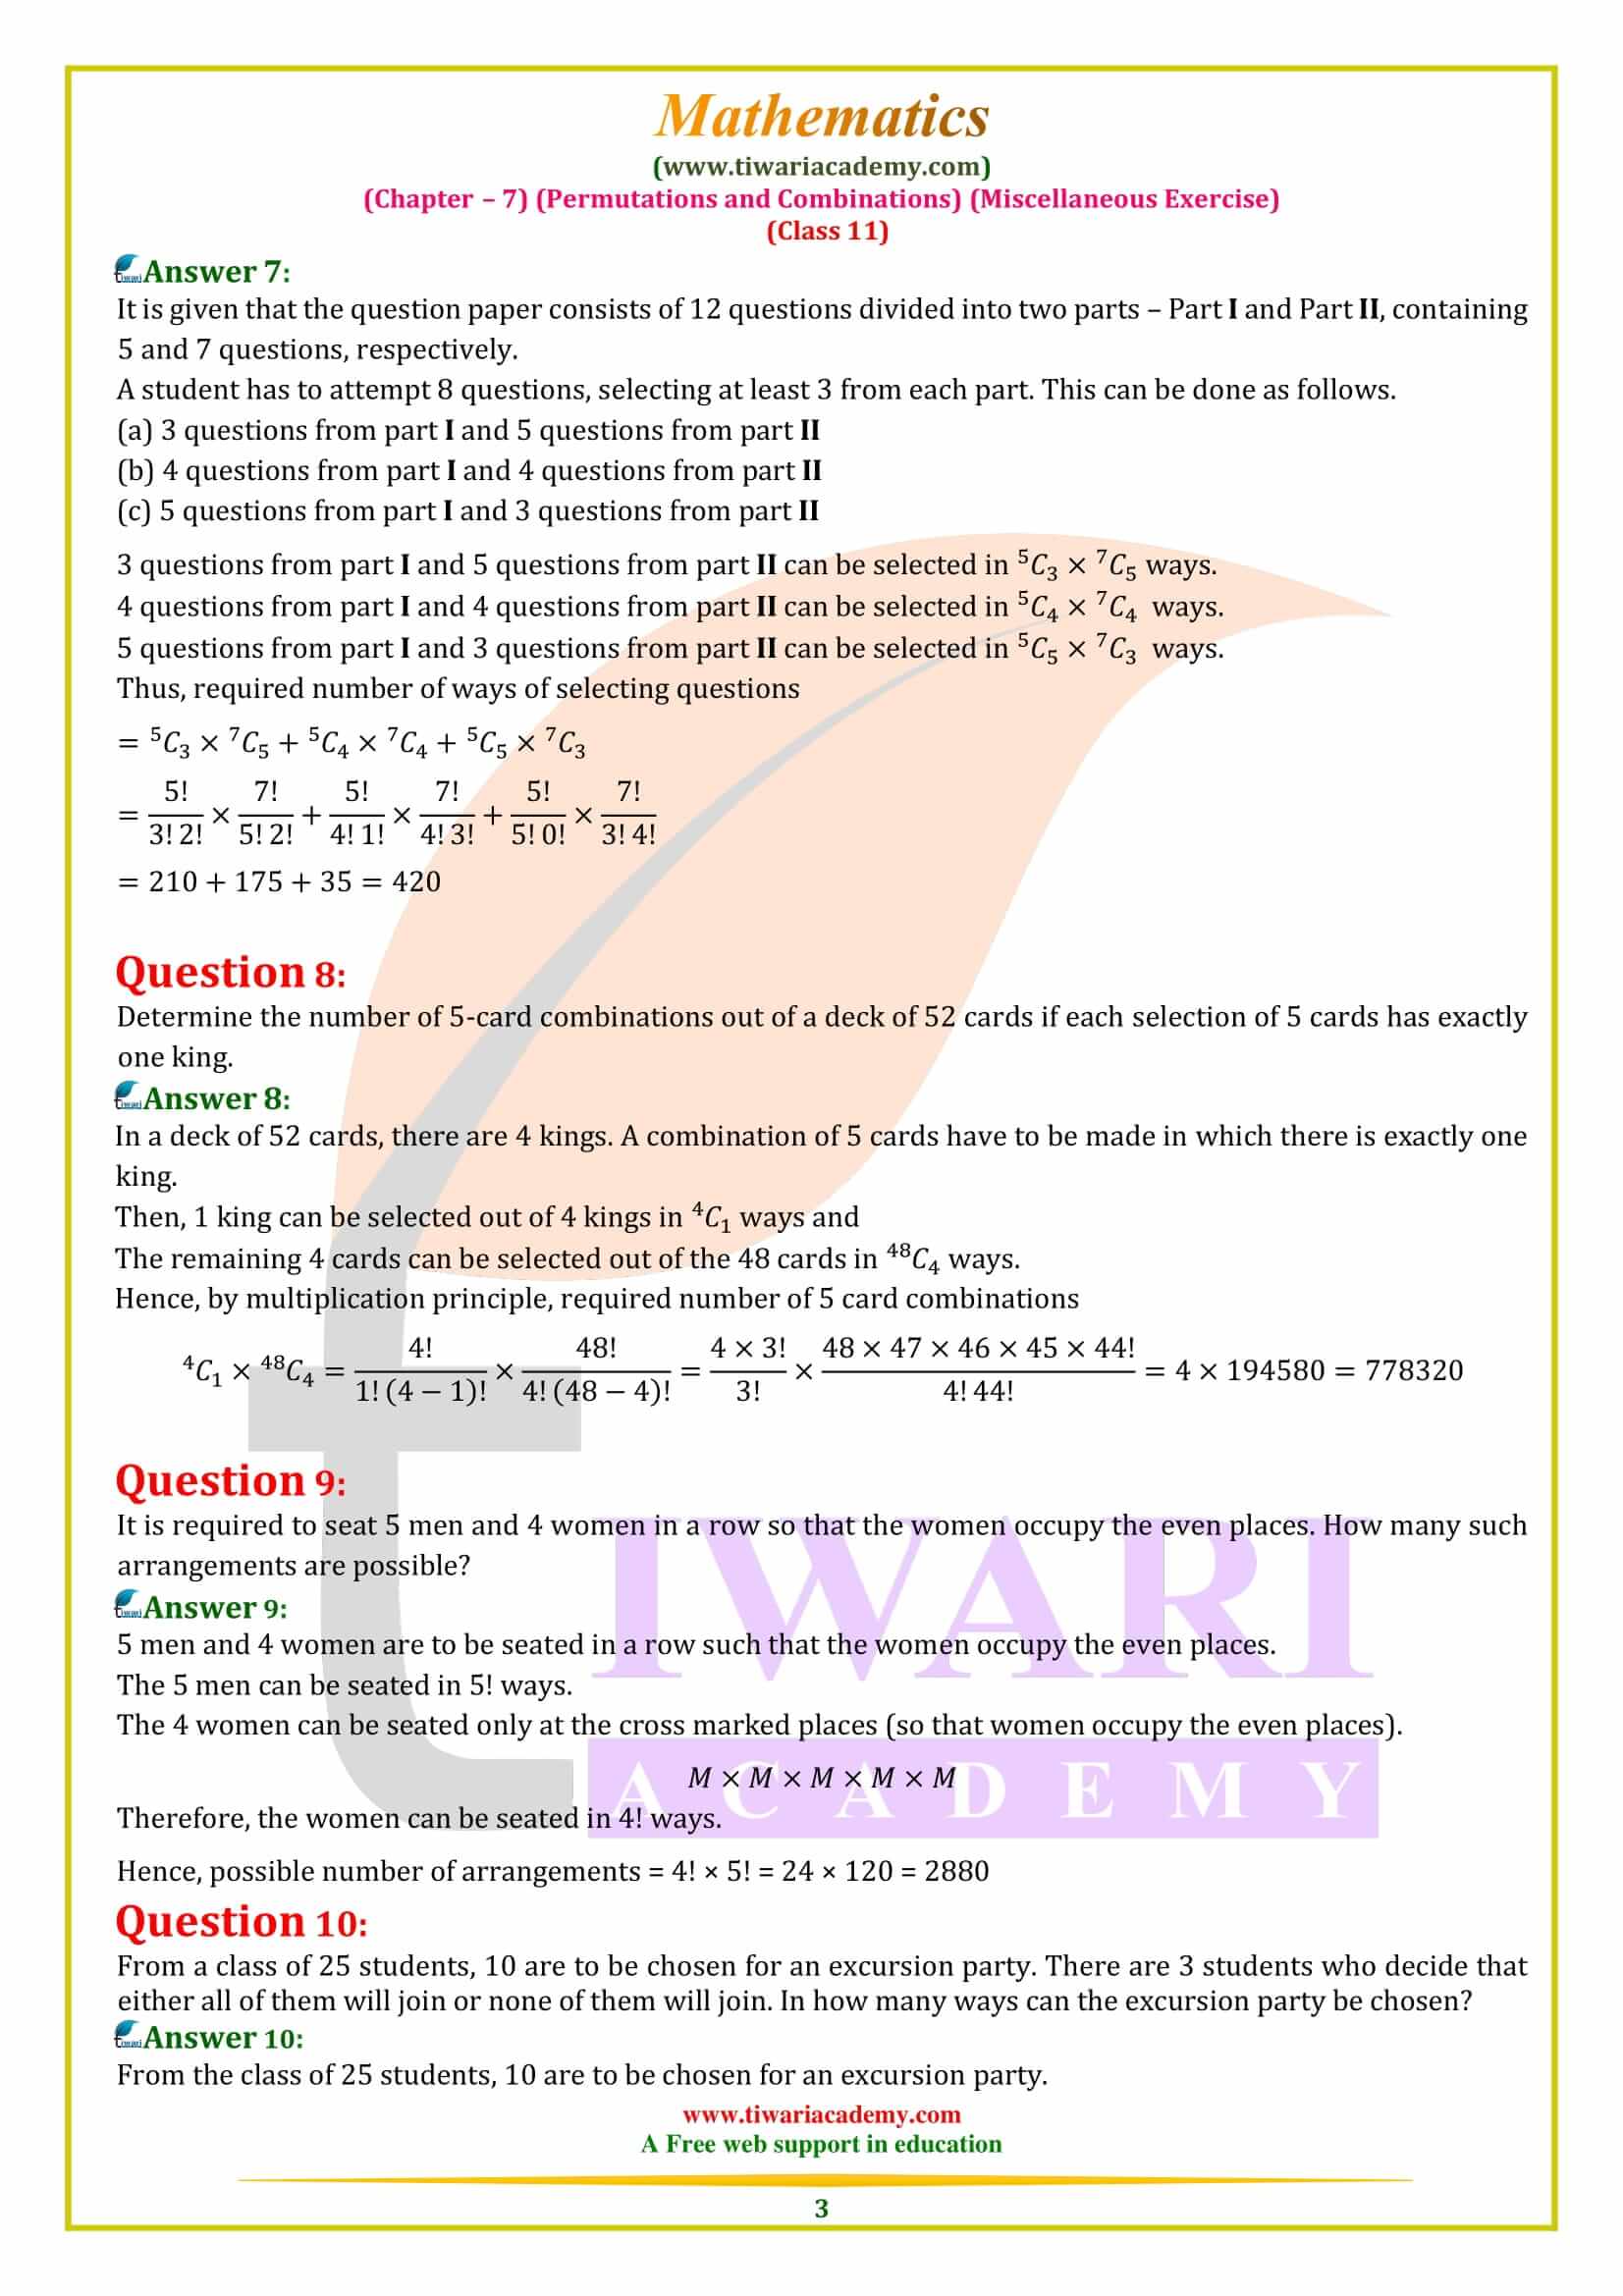 NCERT Solutions for Class 11 Maths Chapter 7 Miscellaneous Exercise in PDF